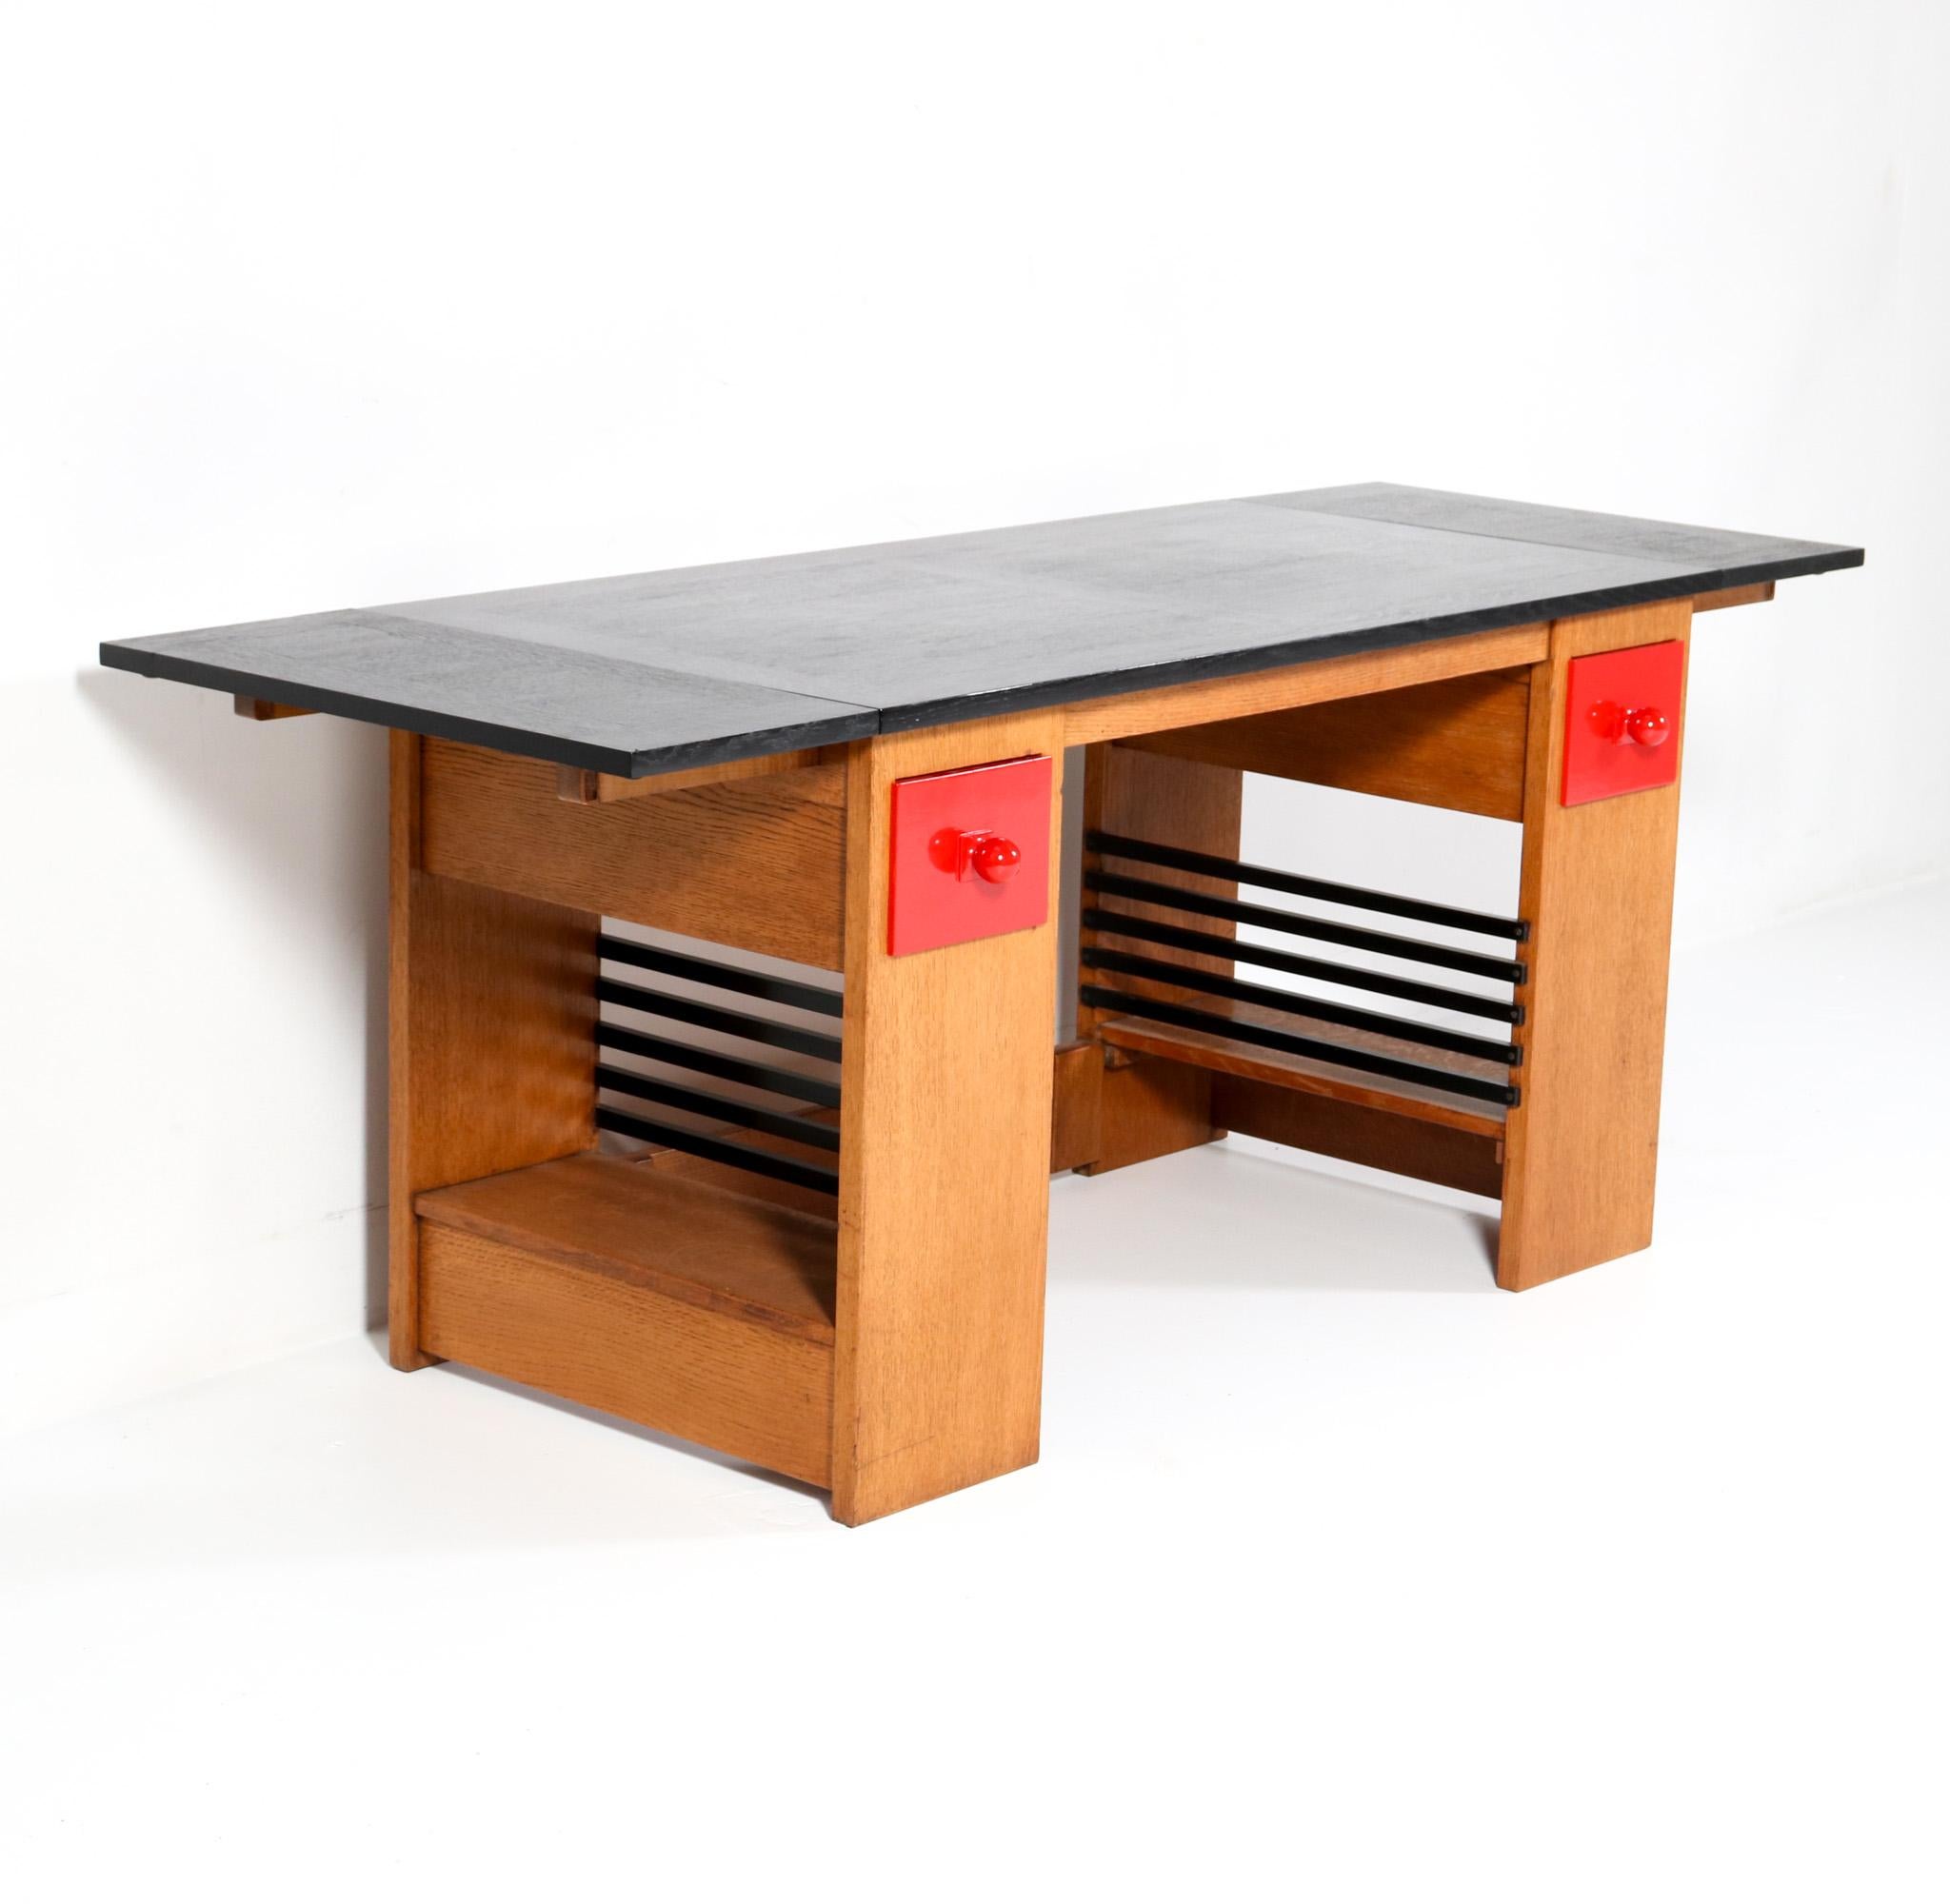 Oak  Art Deco Modernist Desk or Writing Table by Hendrik Wouda for Pander, 1920s For Sale